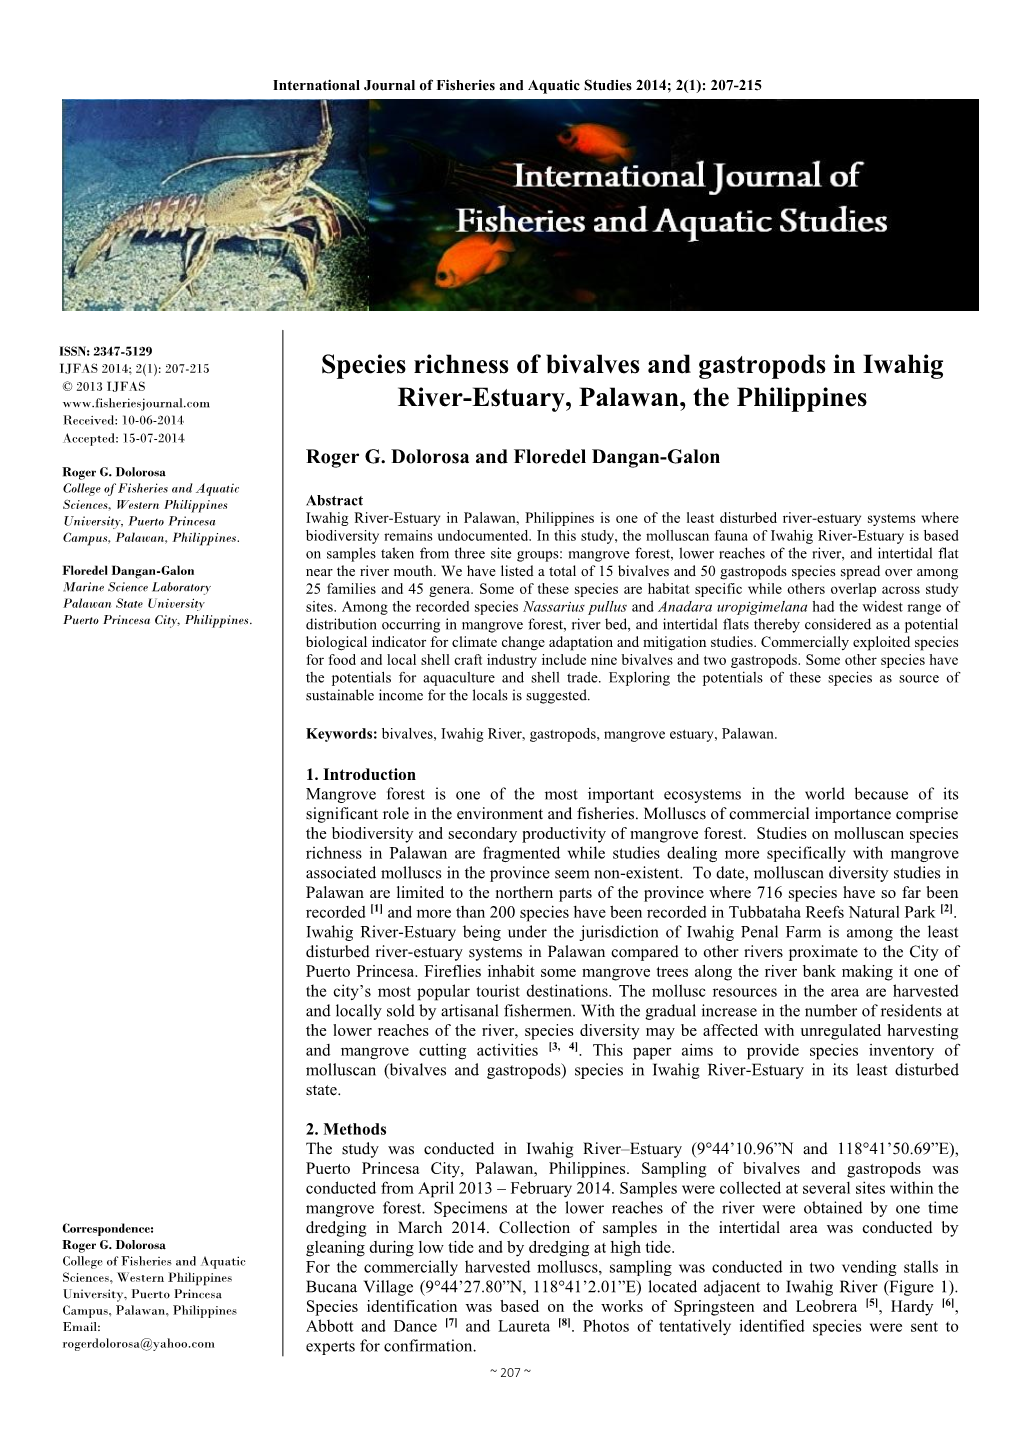 Species Richness of Bivalves and Gastropods in Iwahig River-Estuary